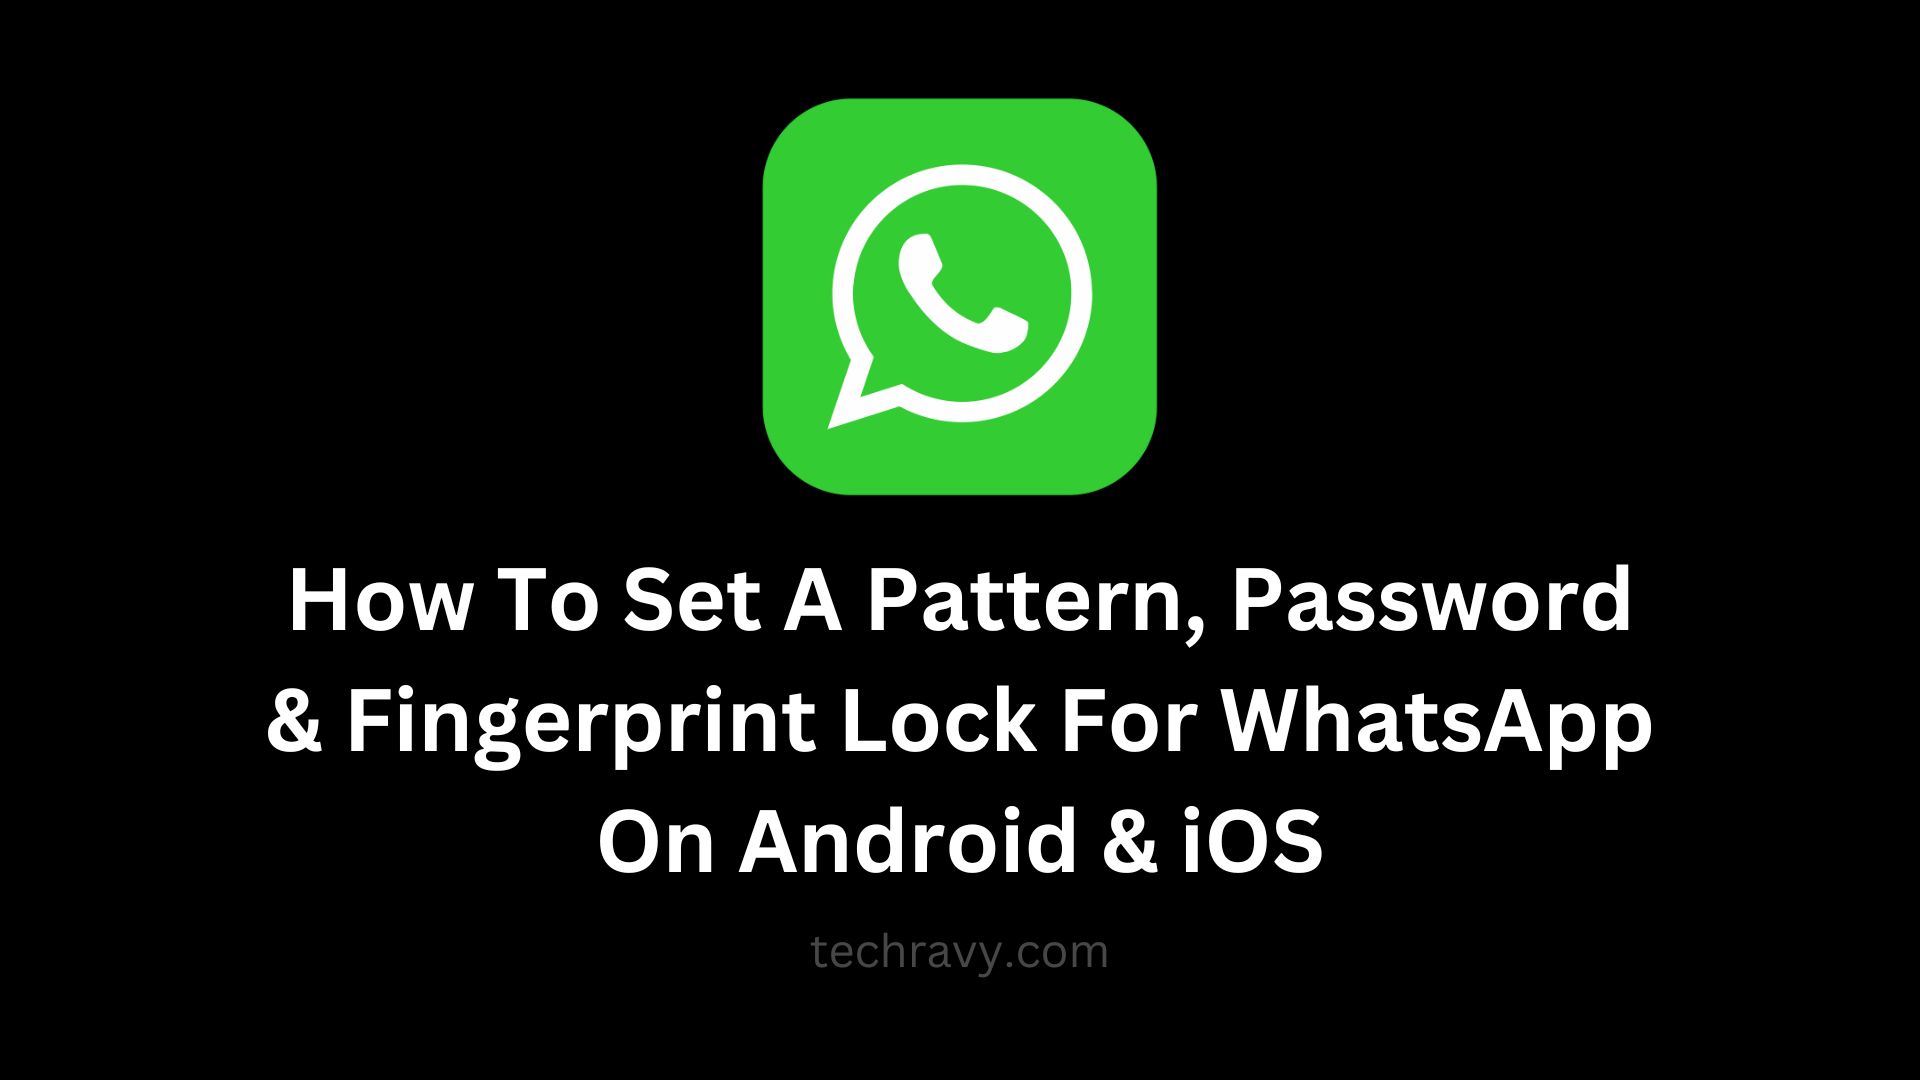 How To Set A Pattern Lock For WhatsApp On Android & iOS